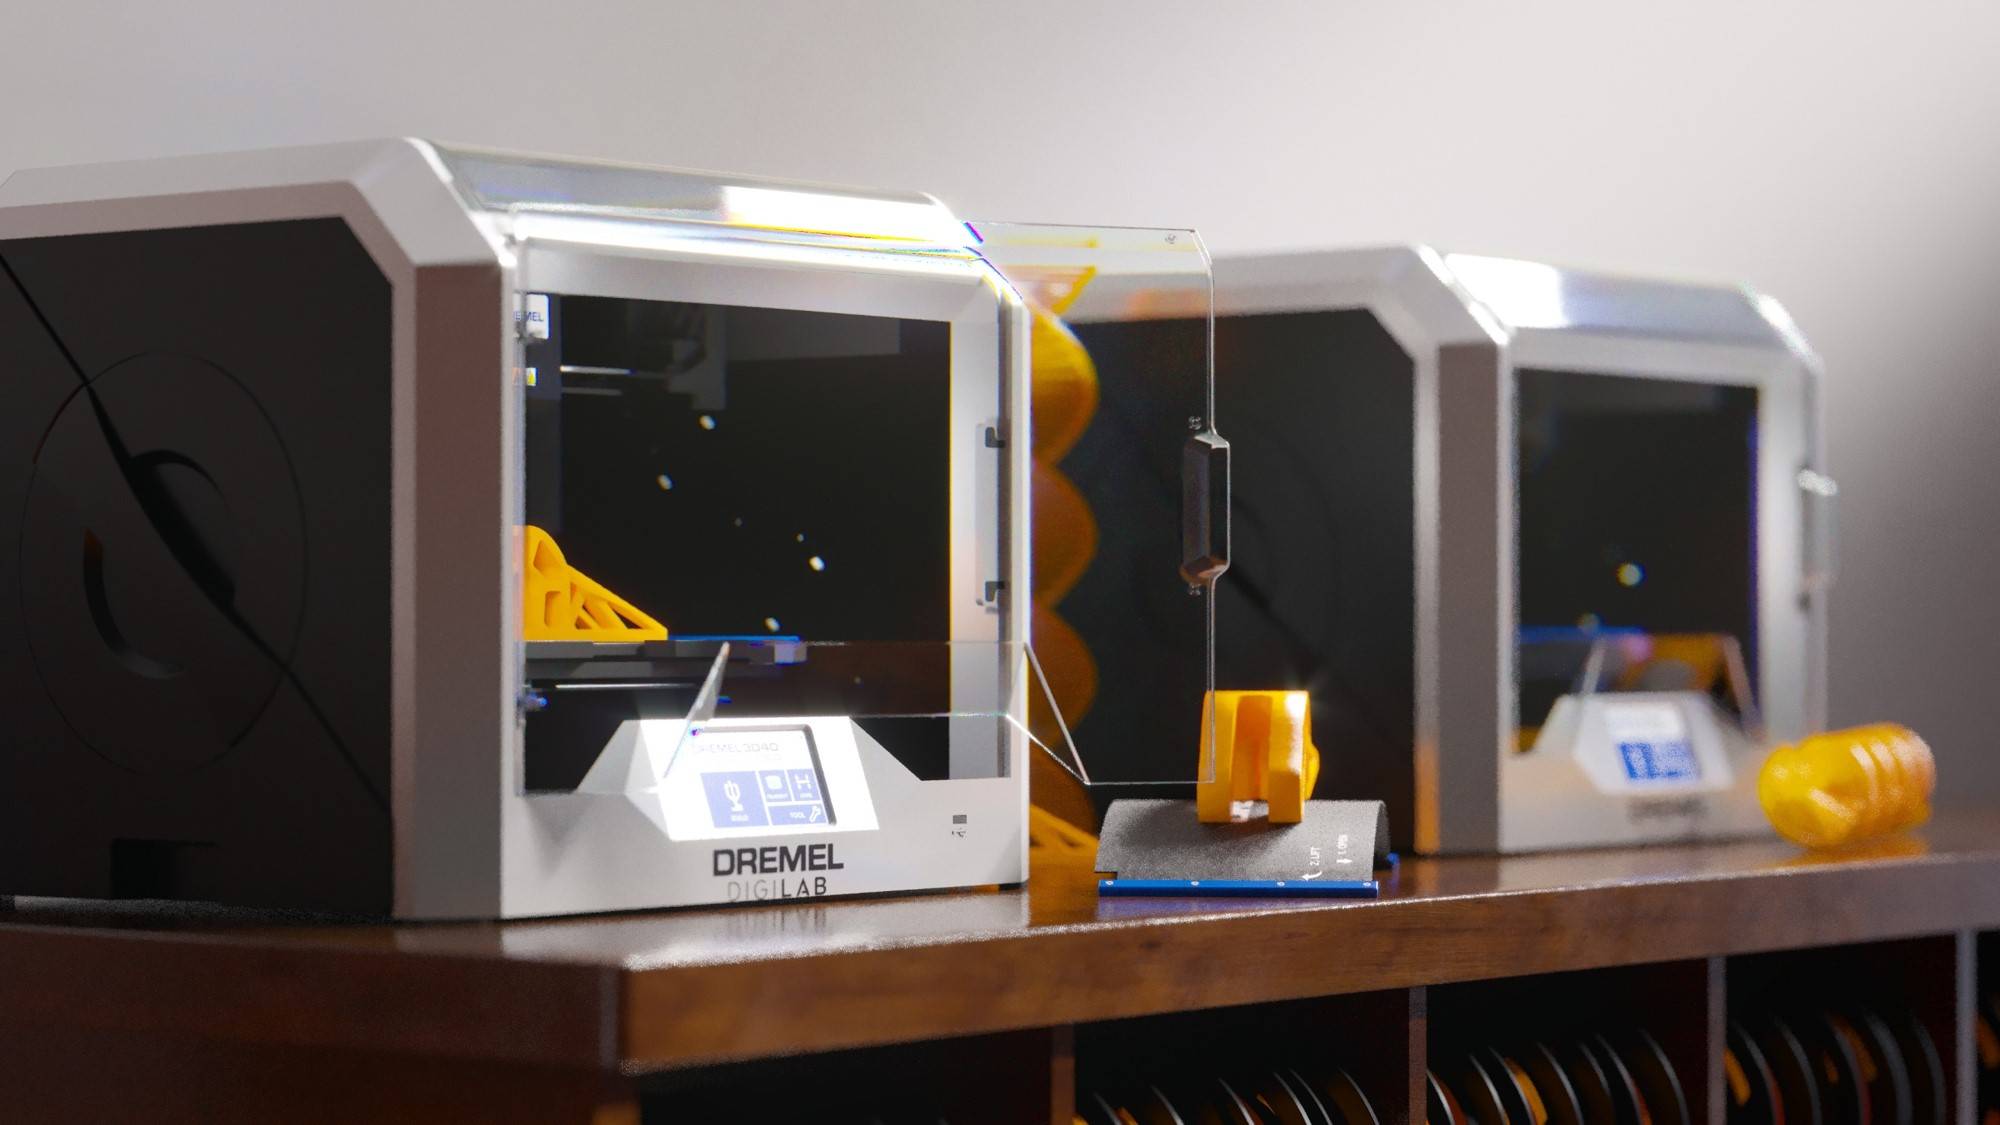 Three quarter angle of two 3D40-FLX 3D printers sitting on a wooden shelf